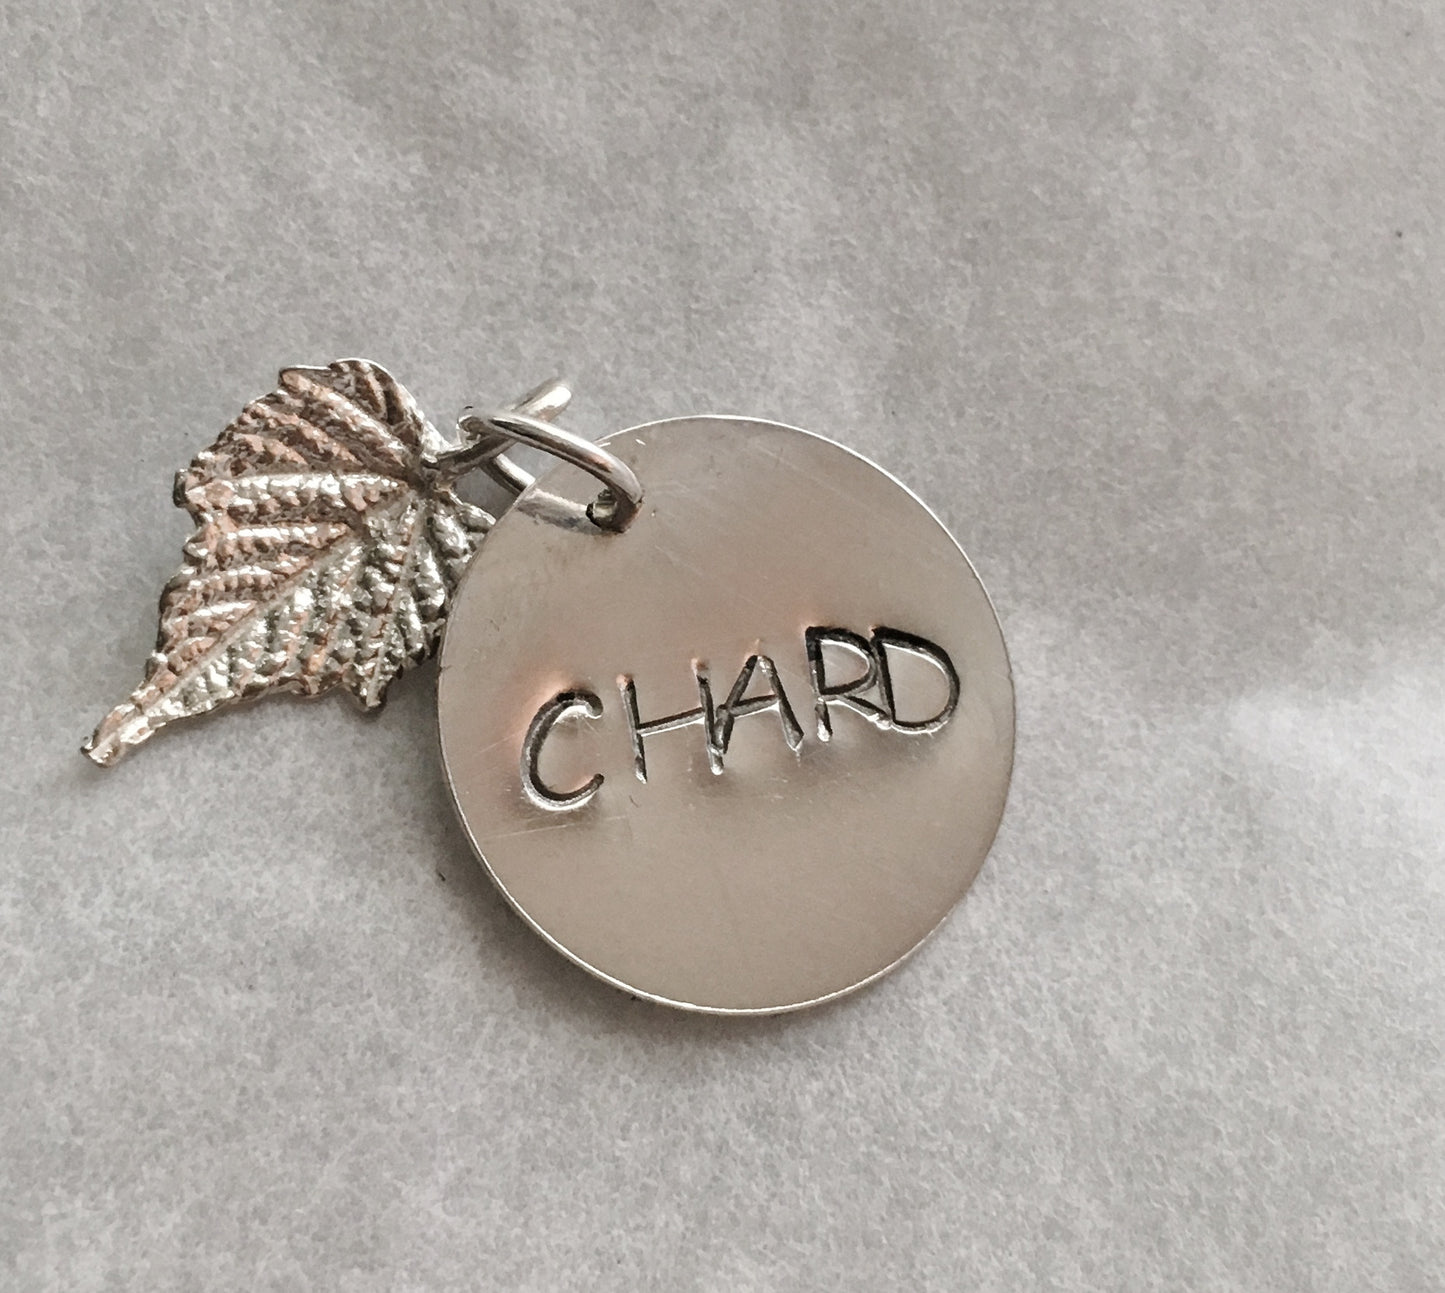 Chardonnay White Wine Charm in Sterling Silver